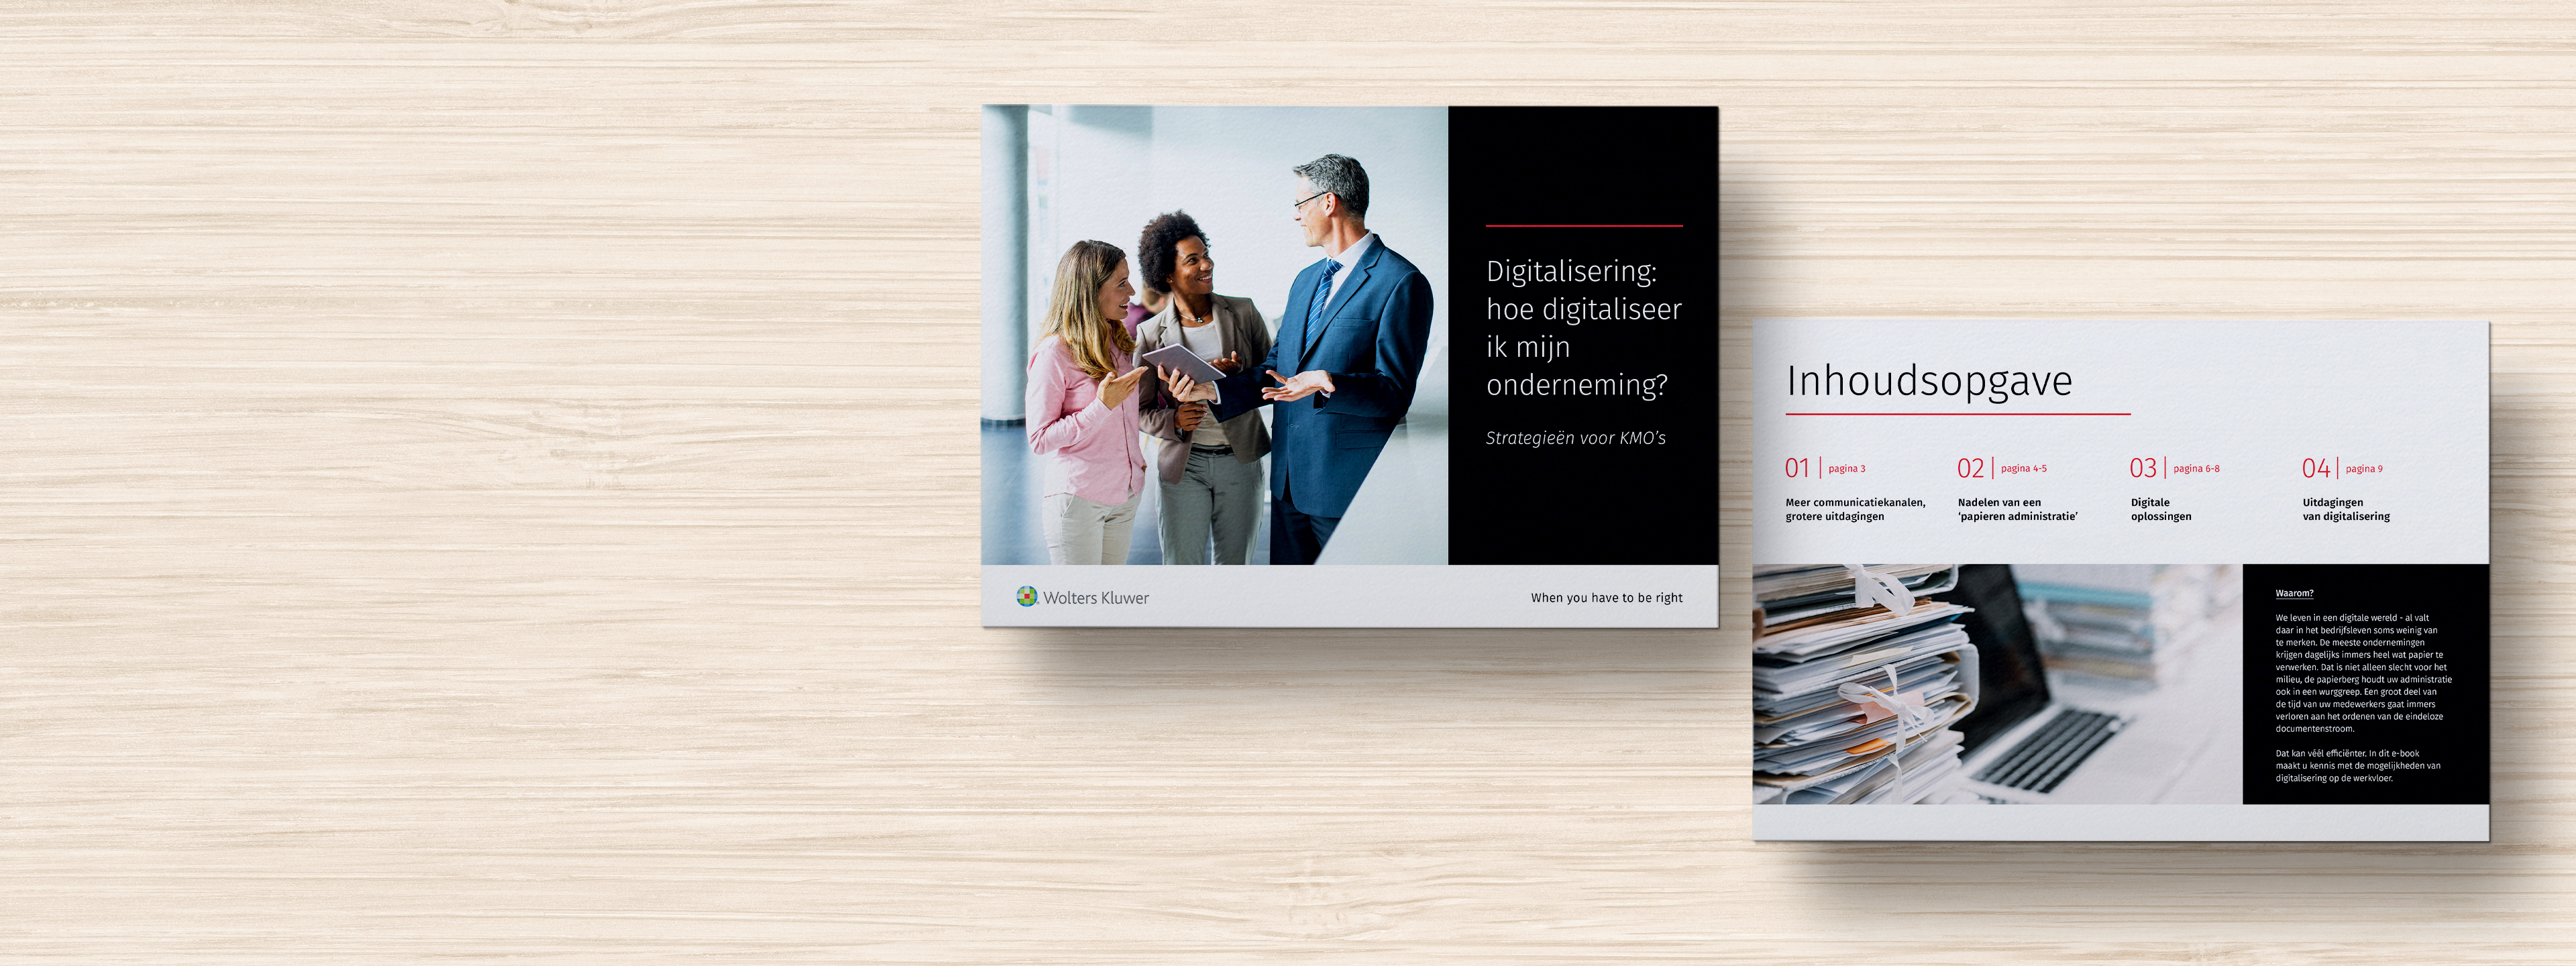 Wolters Kluwer E-book Digitalisering